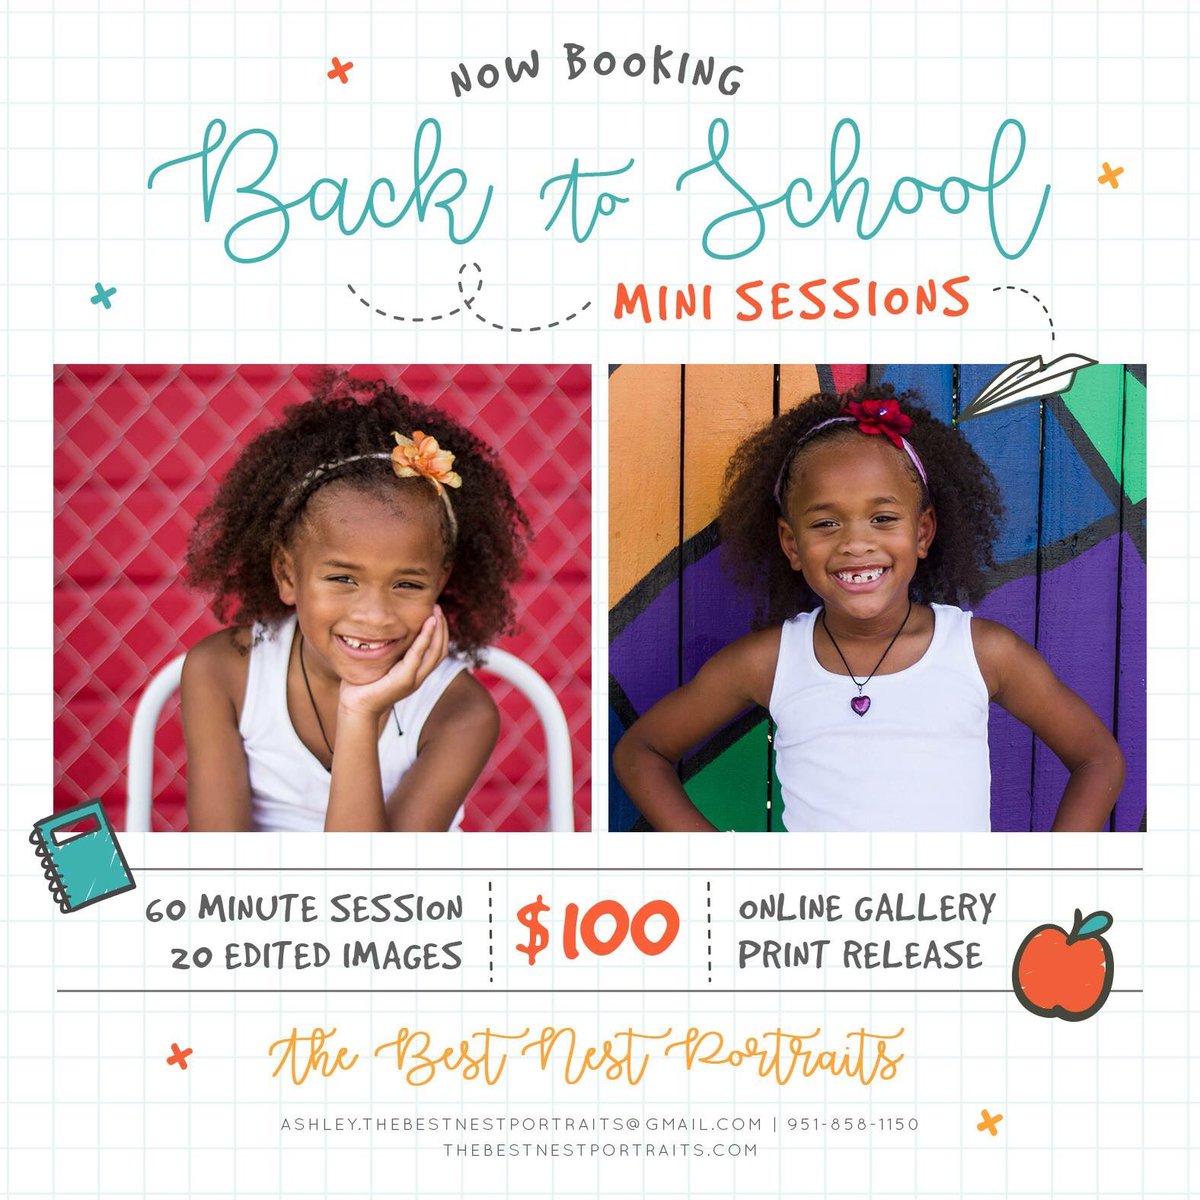 Now booking #BacktoSchool #MiniSessions for early September! Don’t miss out! #TheBestNestPortraits #Portraits #ChildPortraits #ChildPortraitPhotographer